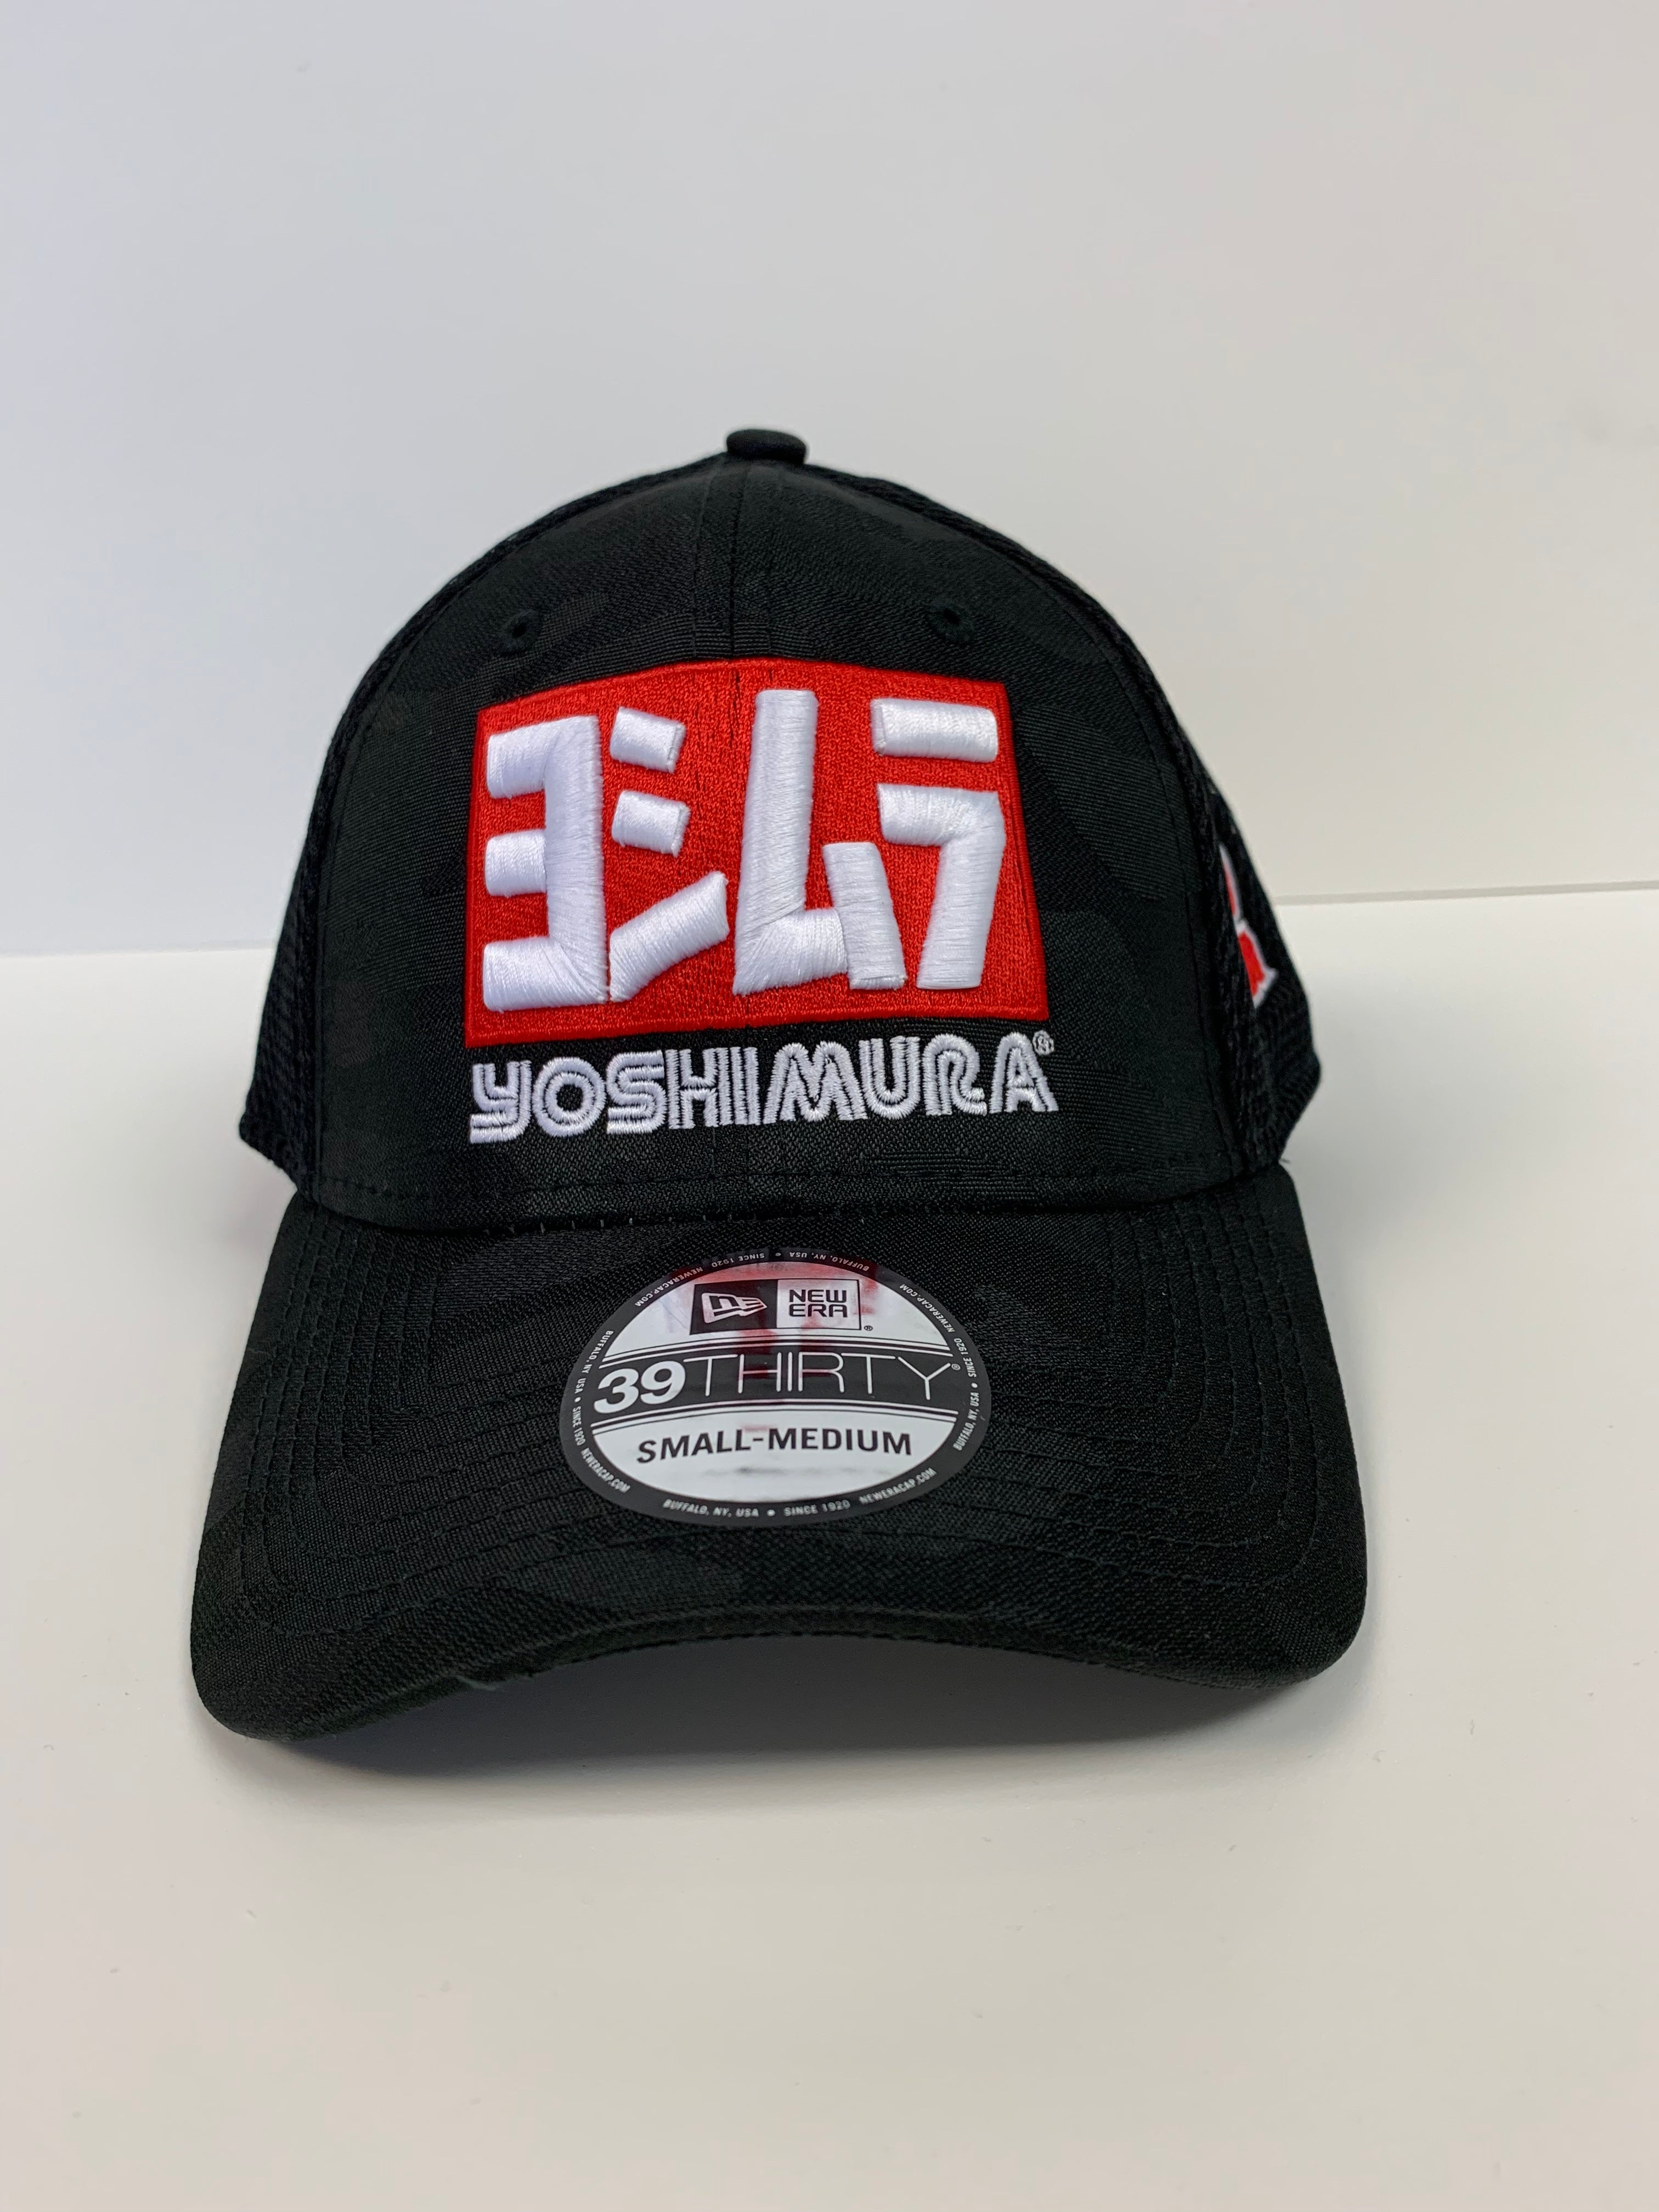 JH2 2019 YOSHIMURA New Era Camo Curved Flex Hat | From The Ashes